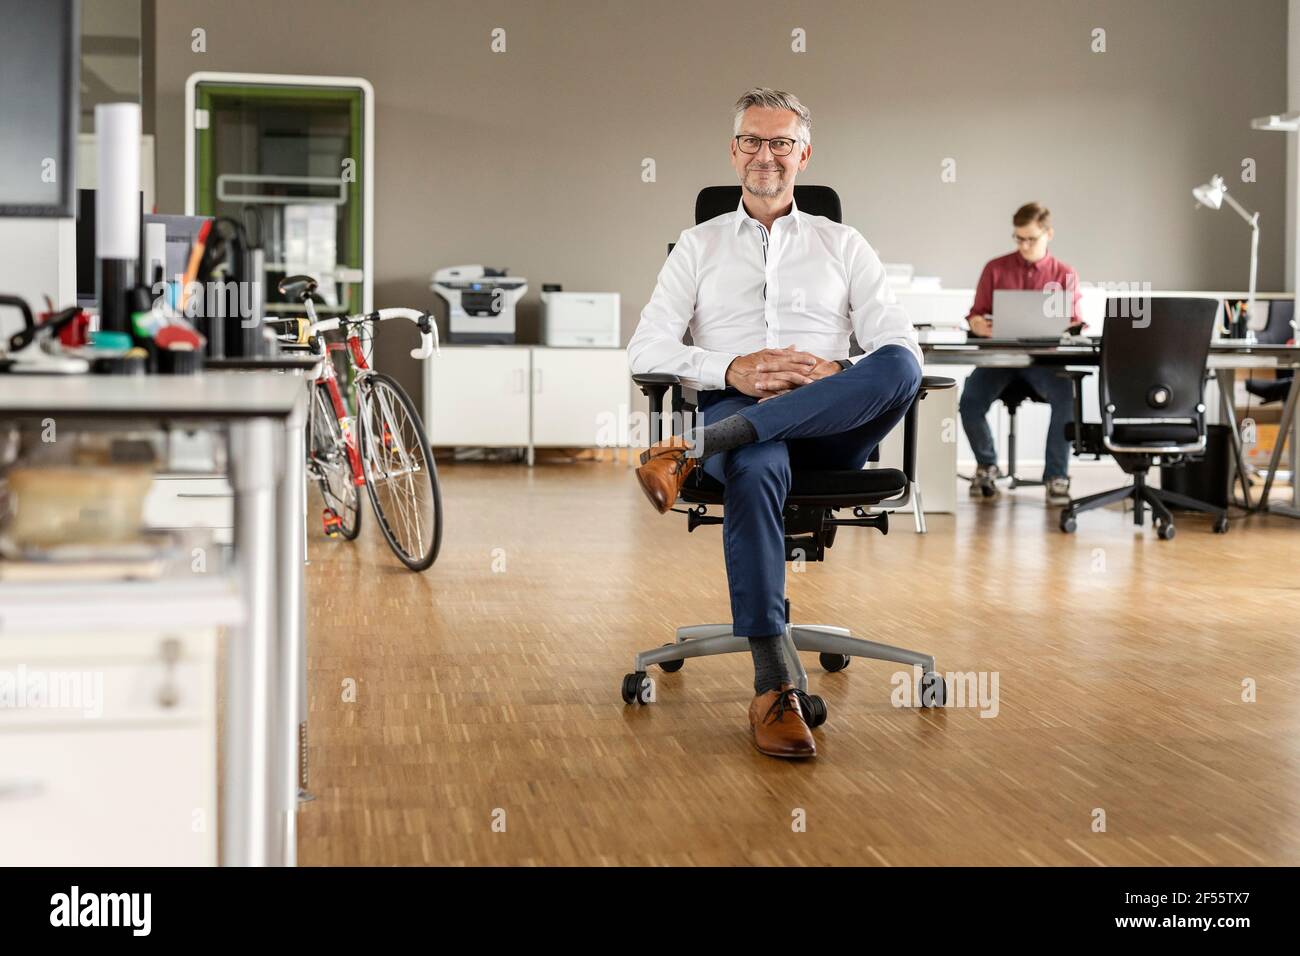 Smiling businessman with legs crossed at knee sitting on chair in office Stock Photo